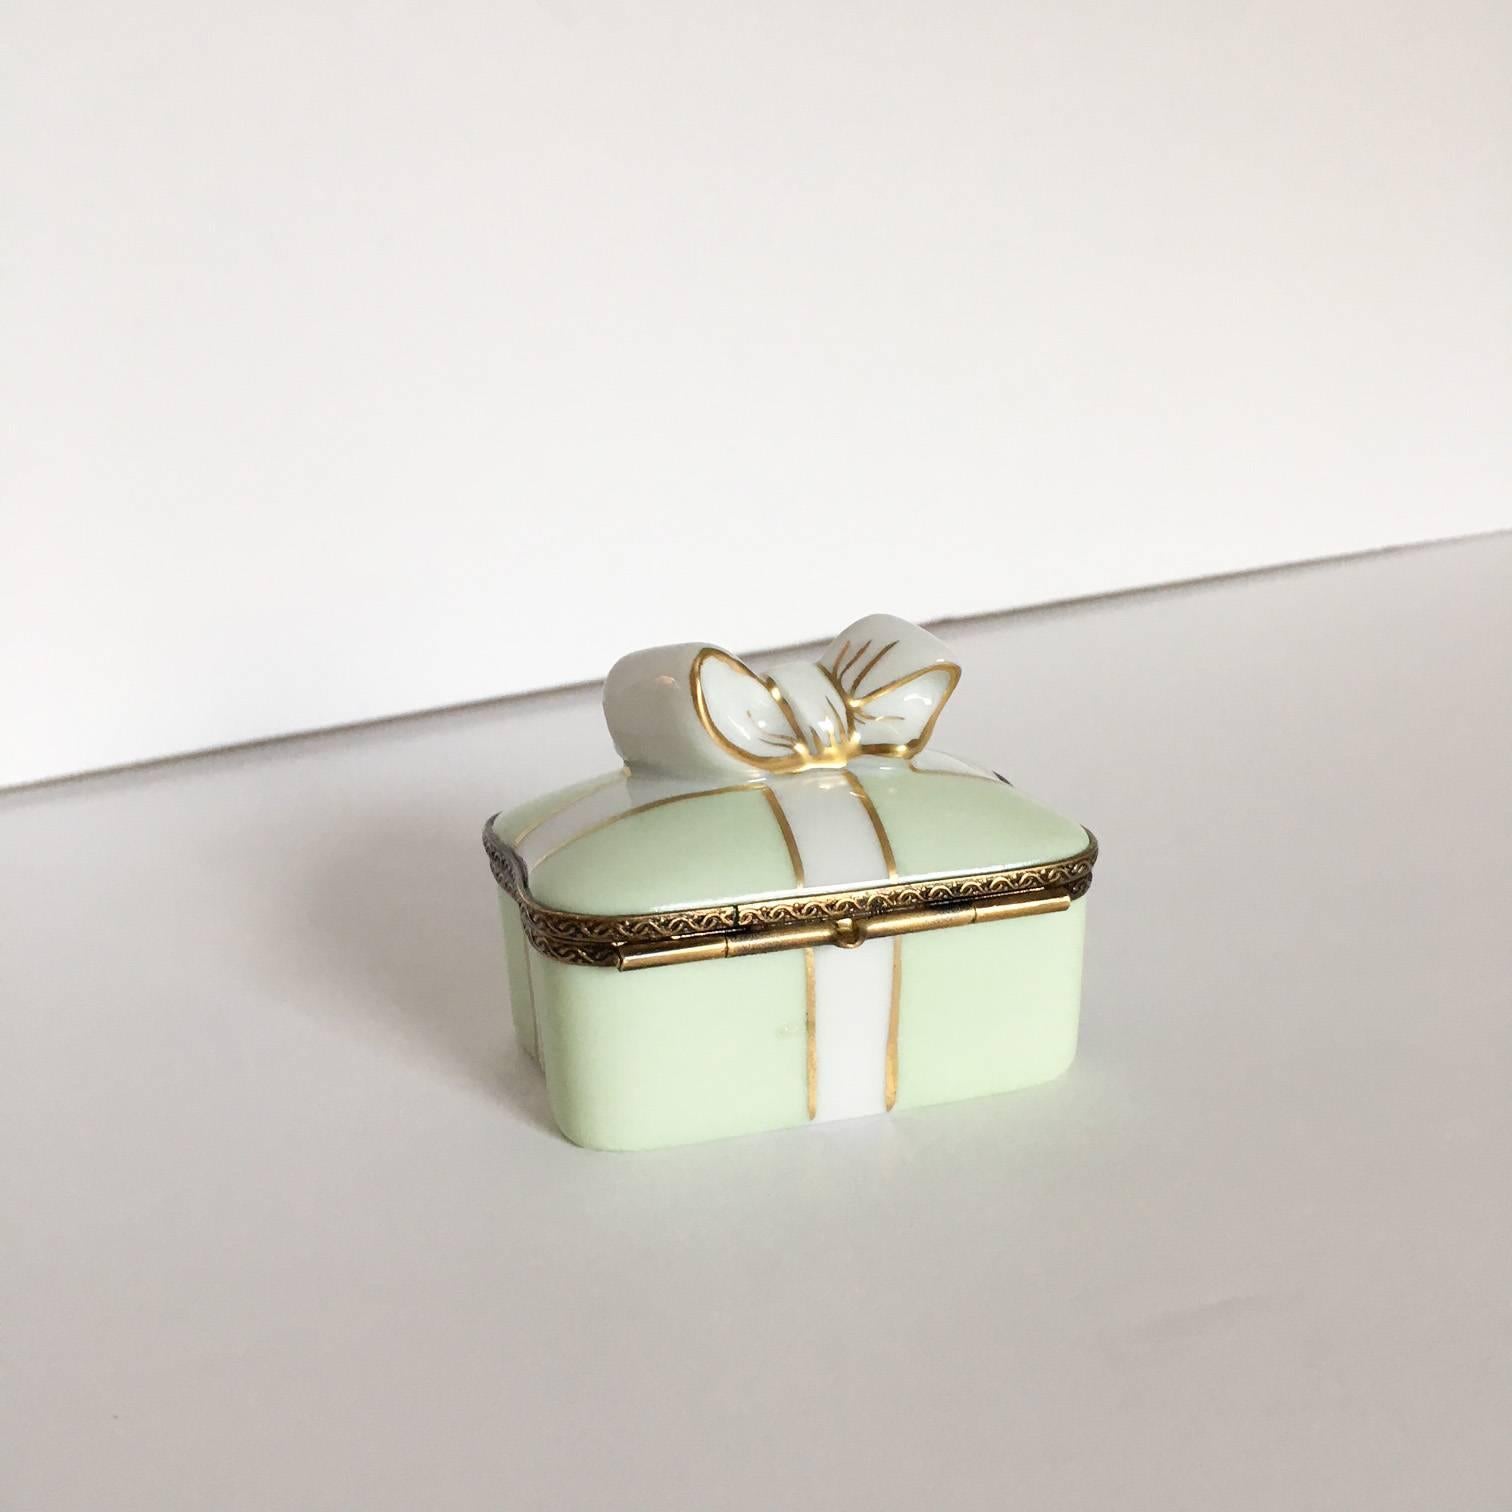 French Provincial Laduree Green Limoges Box with Bow